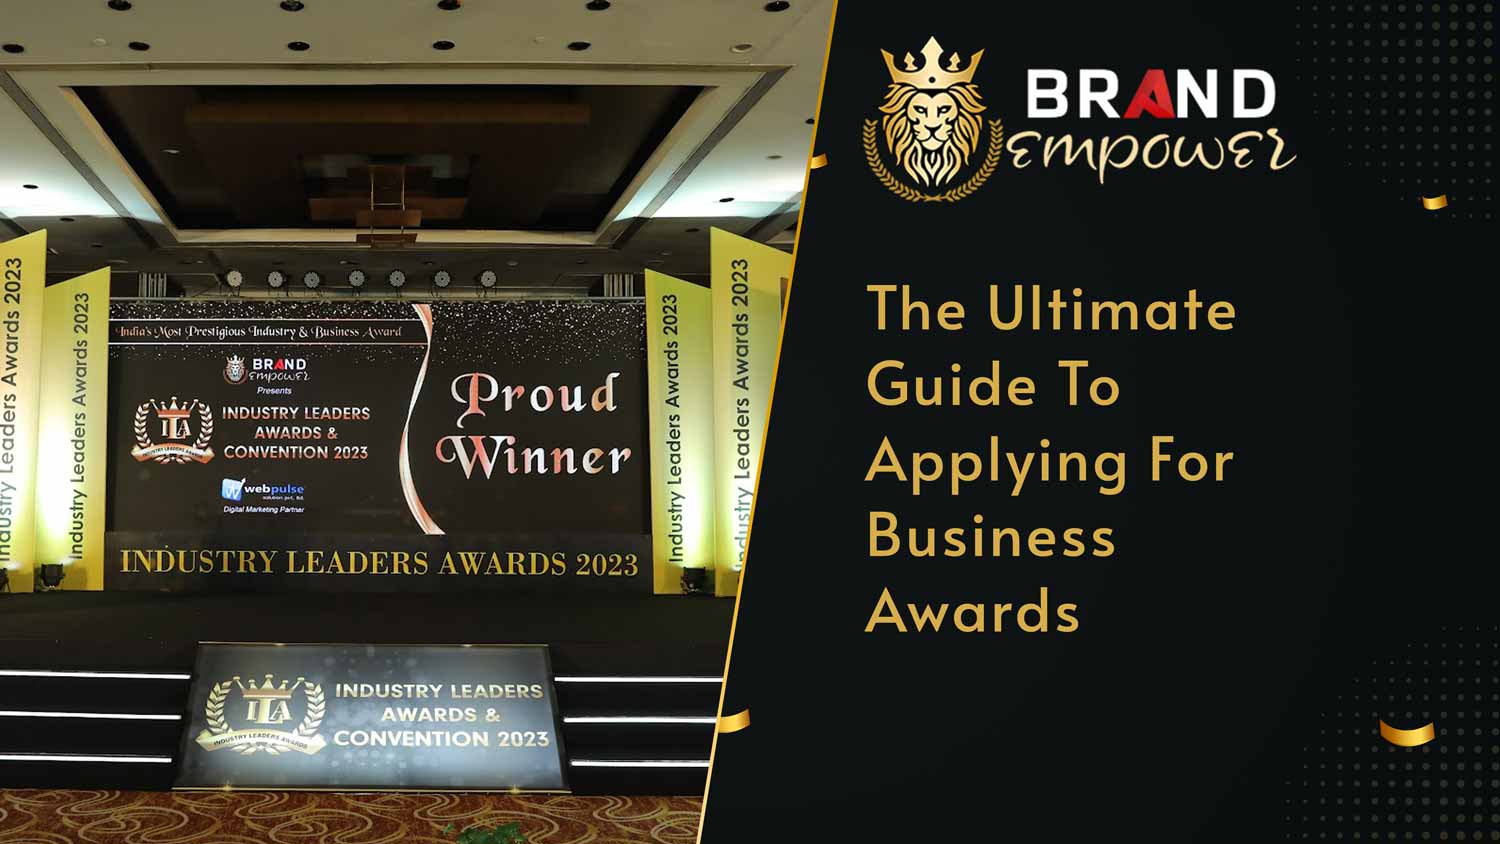 The Ultimate Guide to Applying for Business Awards